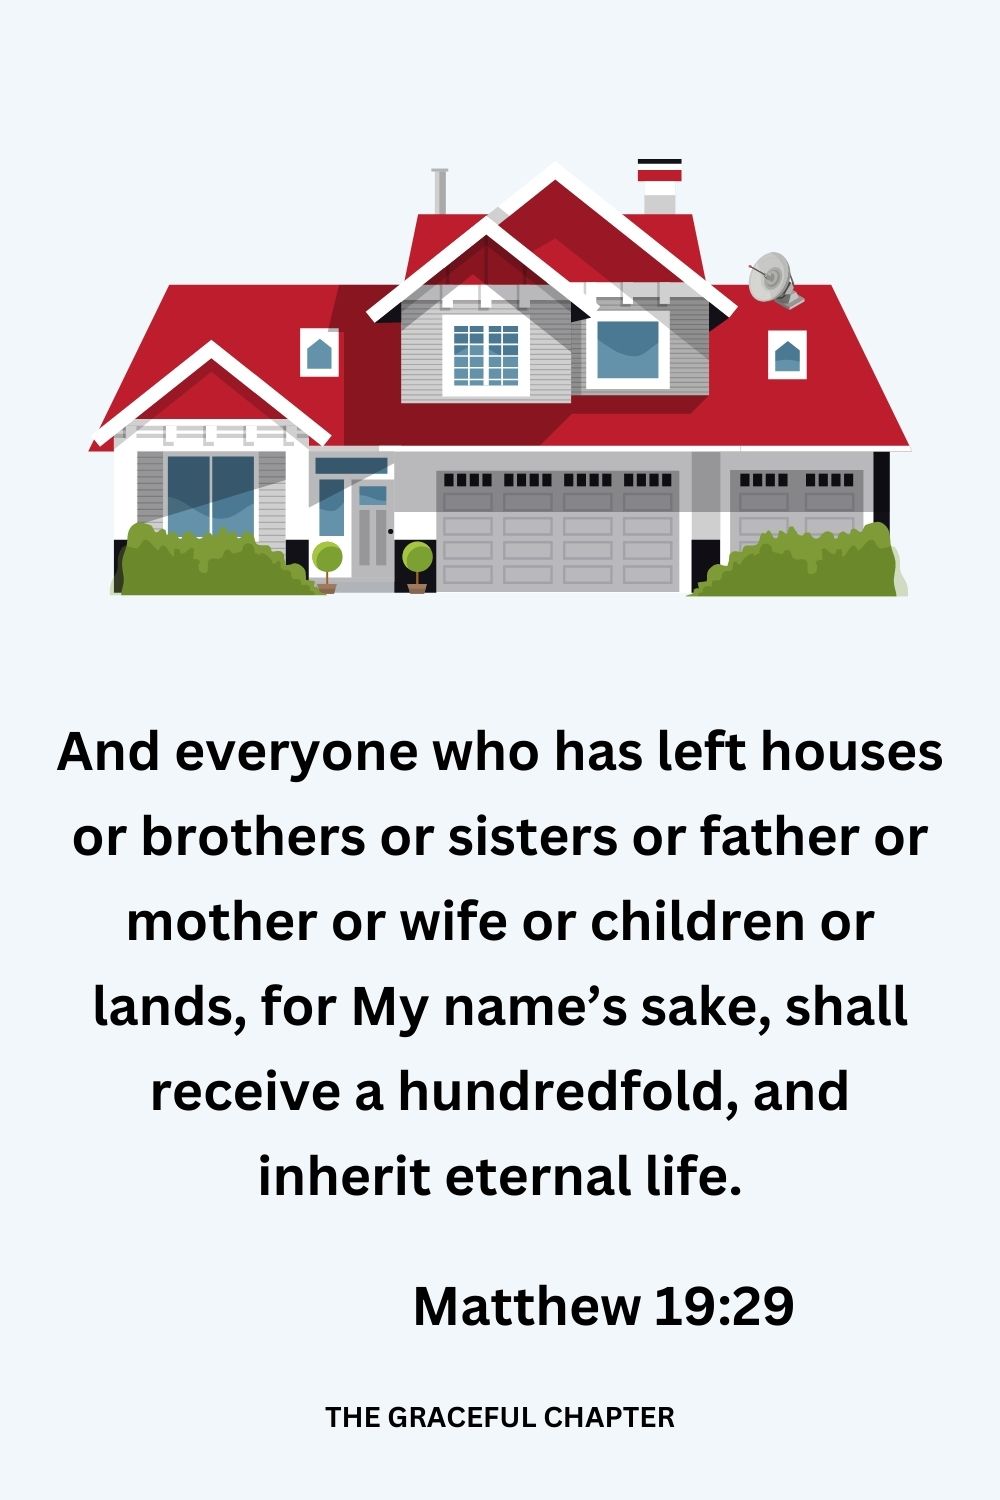 And everyone who has left houses or brothers or sisters or father or mother or wife or children or lands, for My name’s sake, shall receive a hundredfold, and inherit eternal life. Matthew 19:29